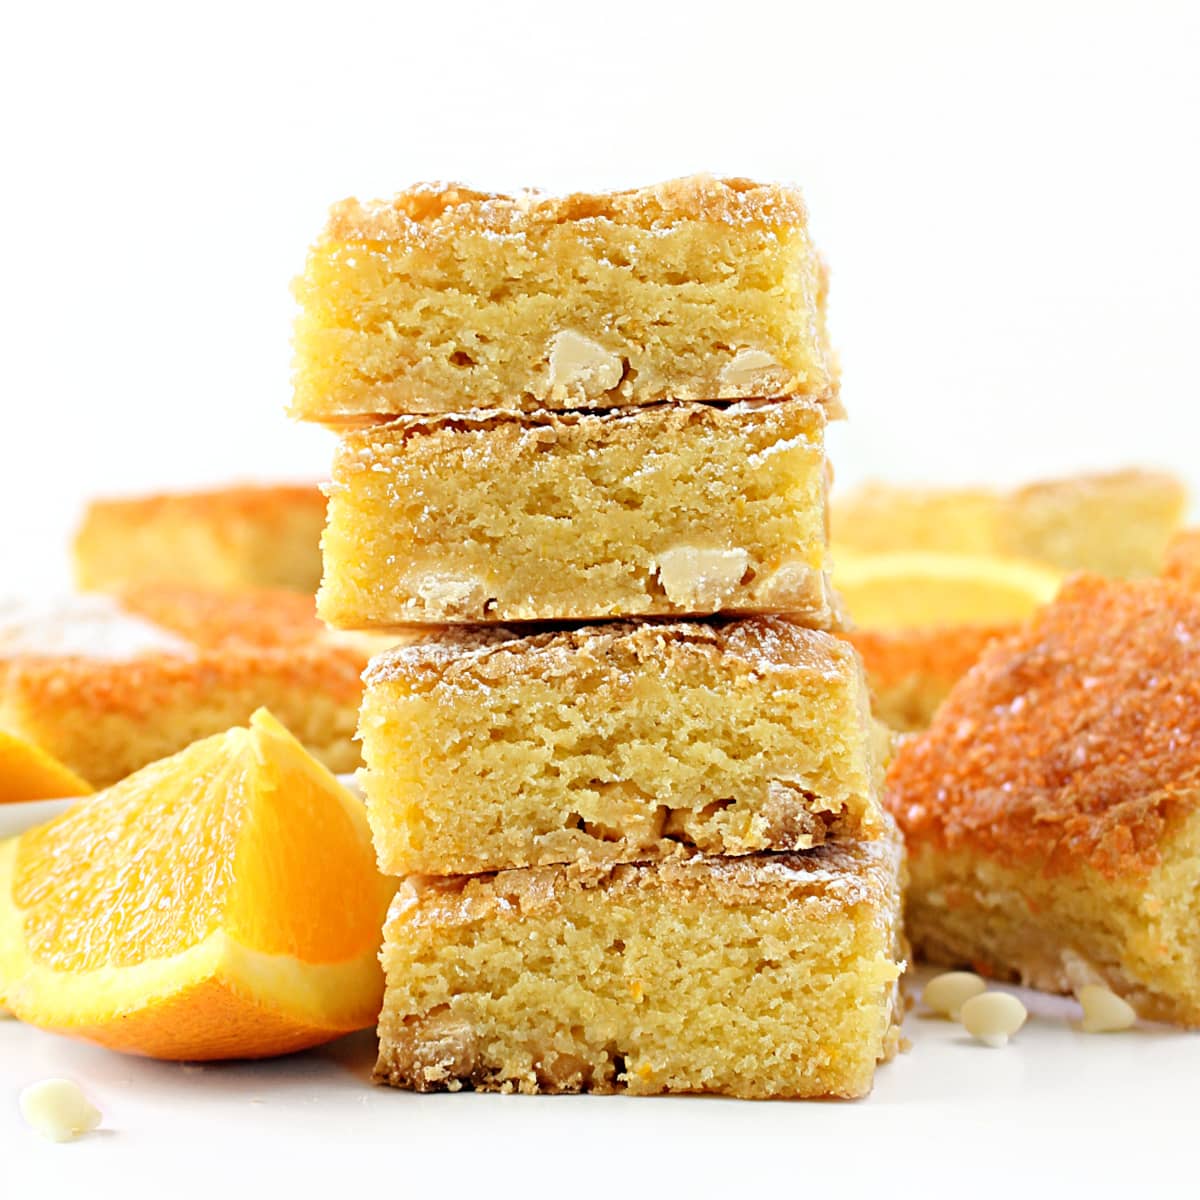 Stack of thick, dense orange bars showing cut edge and moist crumb.